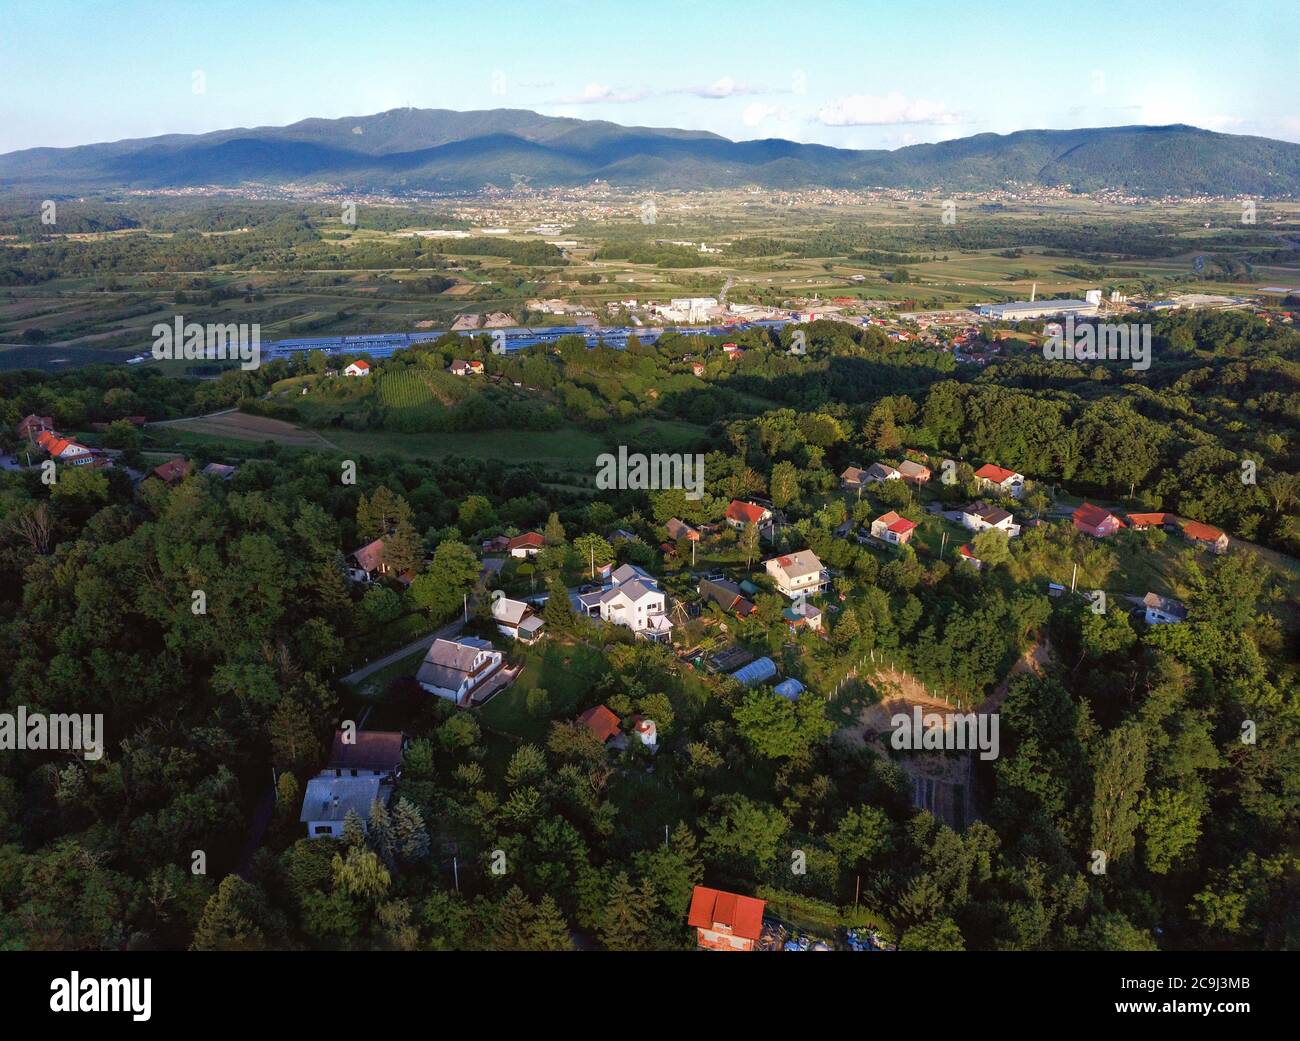 Aerial view of beautiful rural landscape in Pusca, small village in Croatian Zagorje, near town of Zapresic, with Medvednica mountain in background Stock Photo